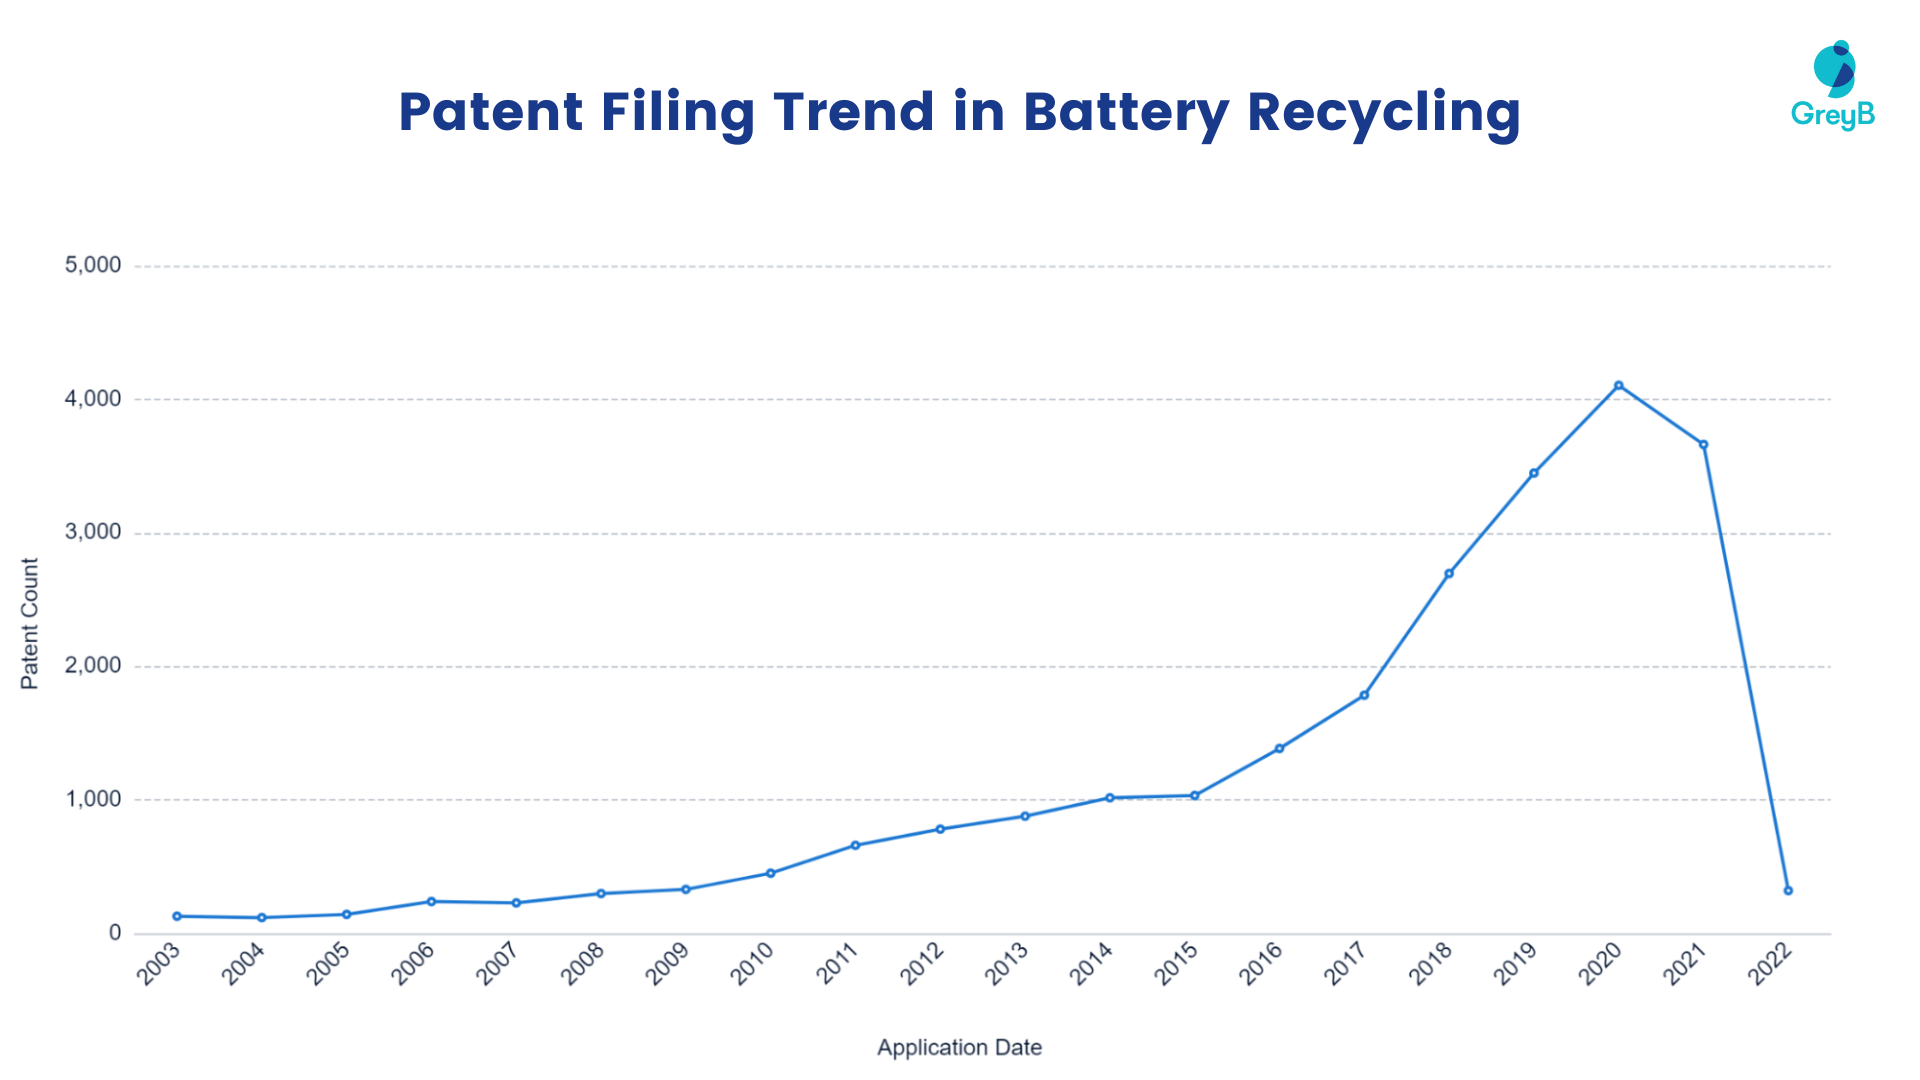 Patent filing trend in battery recycling